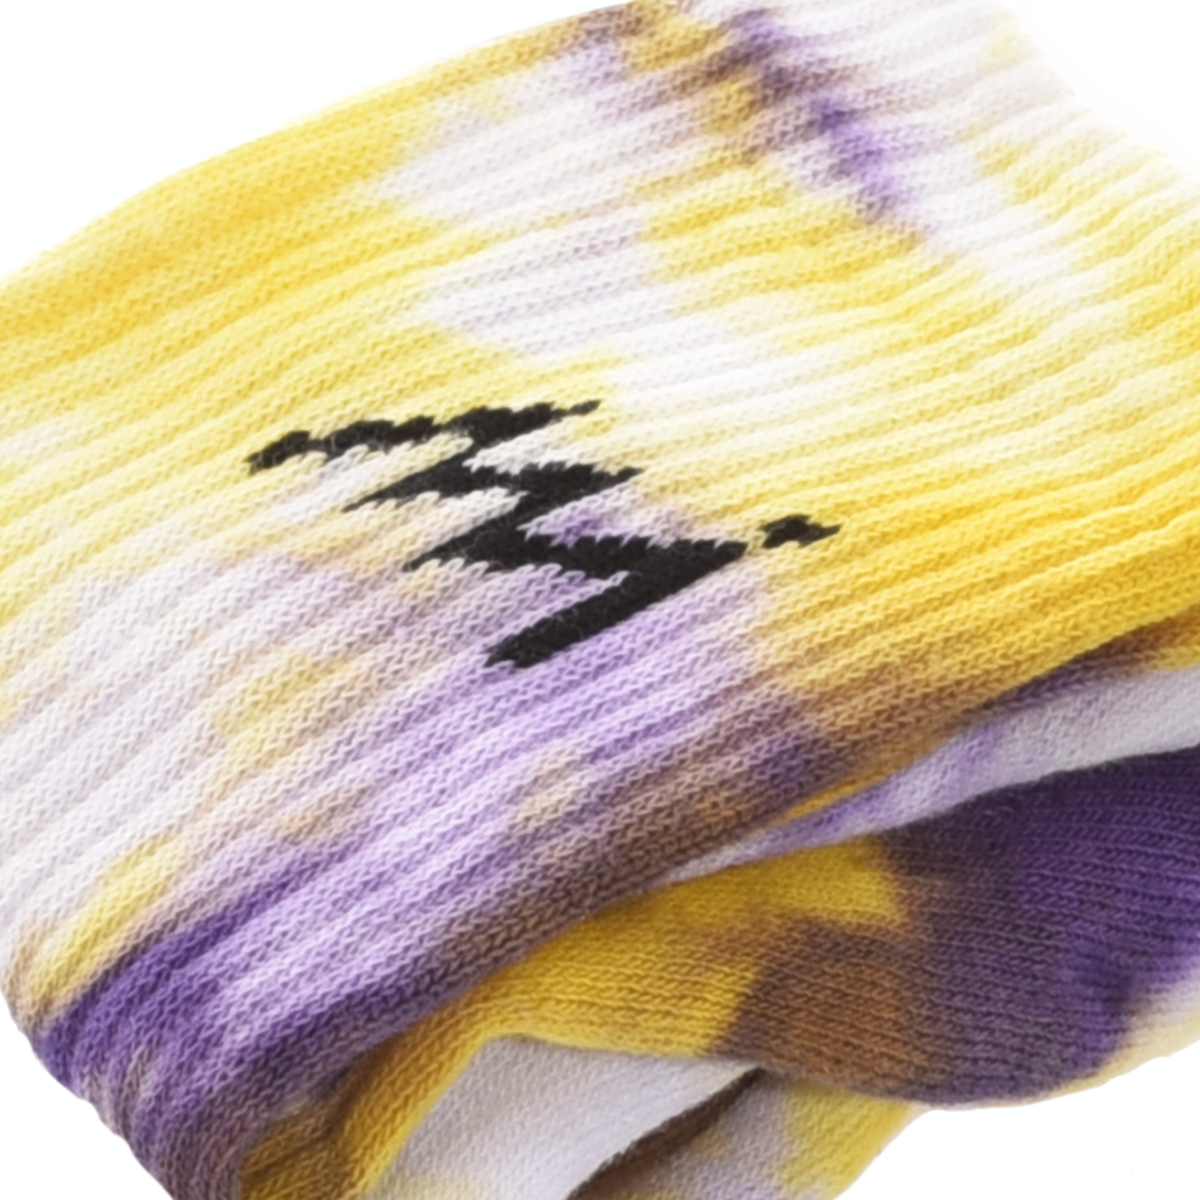 MIMANERA SOCKS LOS ANGELES  Washed-out